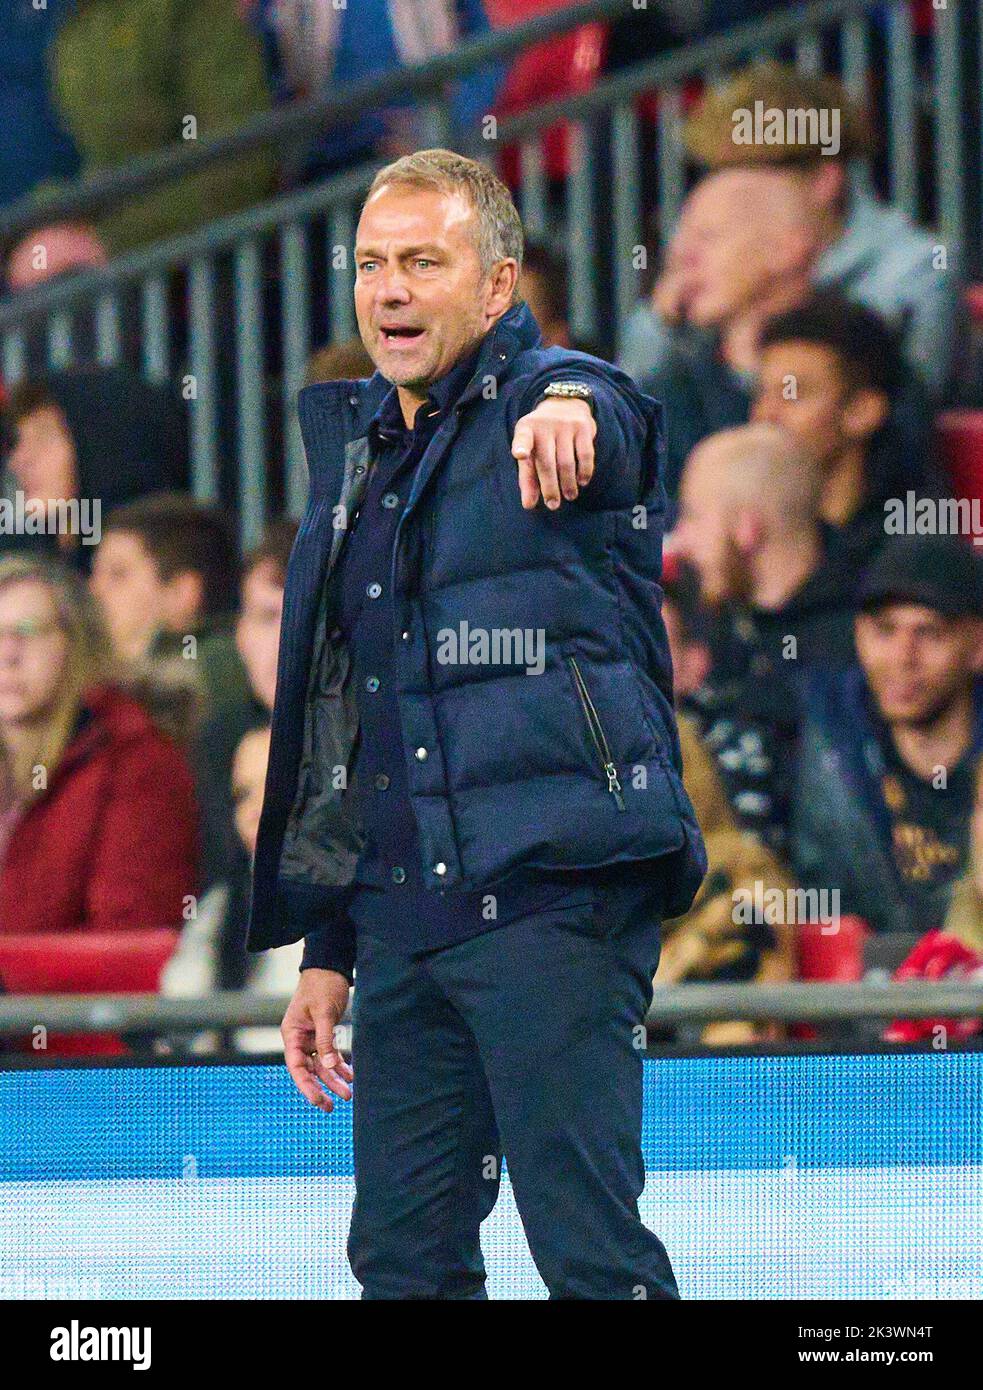 DFB headcoach Hans-Dieter Hansi Flick , Bundestrainer, Nationaltrainer,  in the UEFA Nations League 2022 match  ENGLAND - GERMANY 3-3  in Season 2022/2023 on Sept 26, 2022  in London, Great Britain.  © Peter Schatz / Alamy Live News Stock Photo